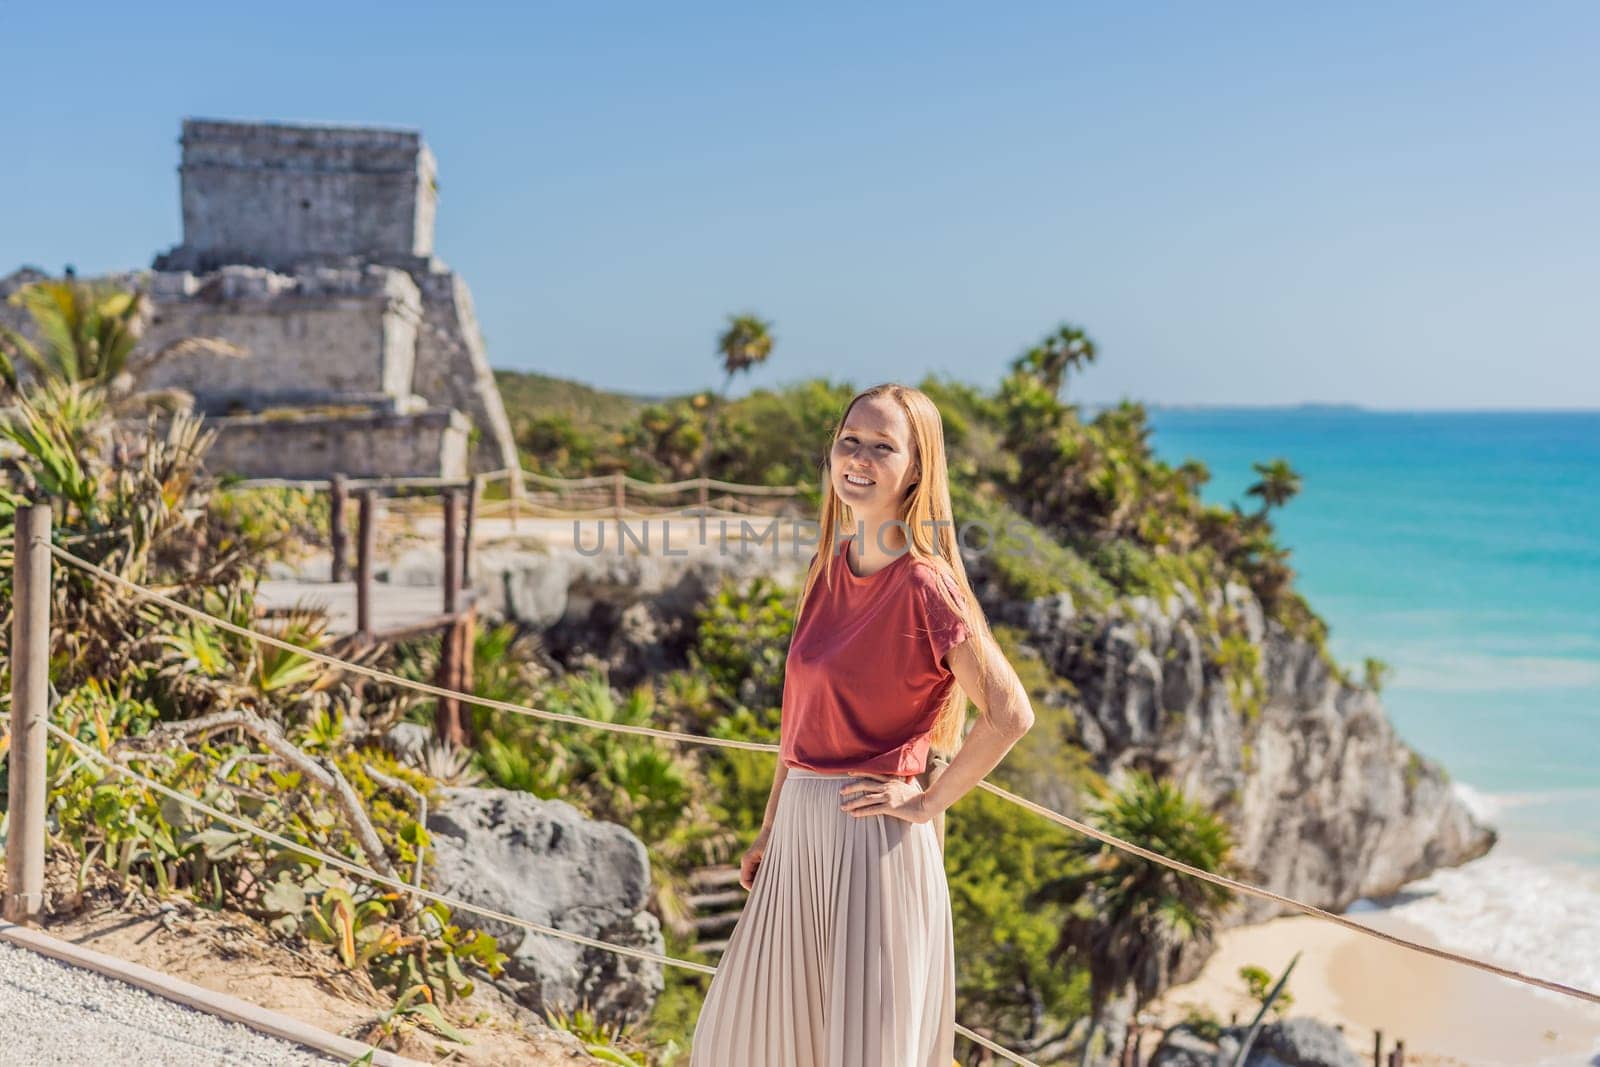 Woman tourist enjoying the view Pre-Columbian Mayan walled city of Tulum, Quintana Roo, Mexico, North America, Tulum, Mexico. El Castillo - castle the Mayan city of Tulum main temple.